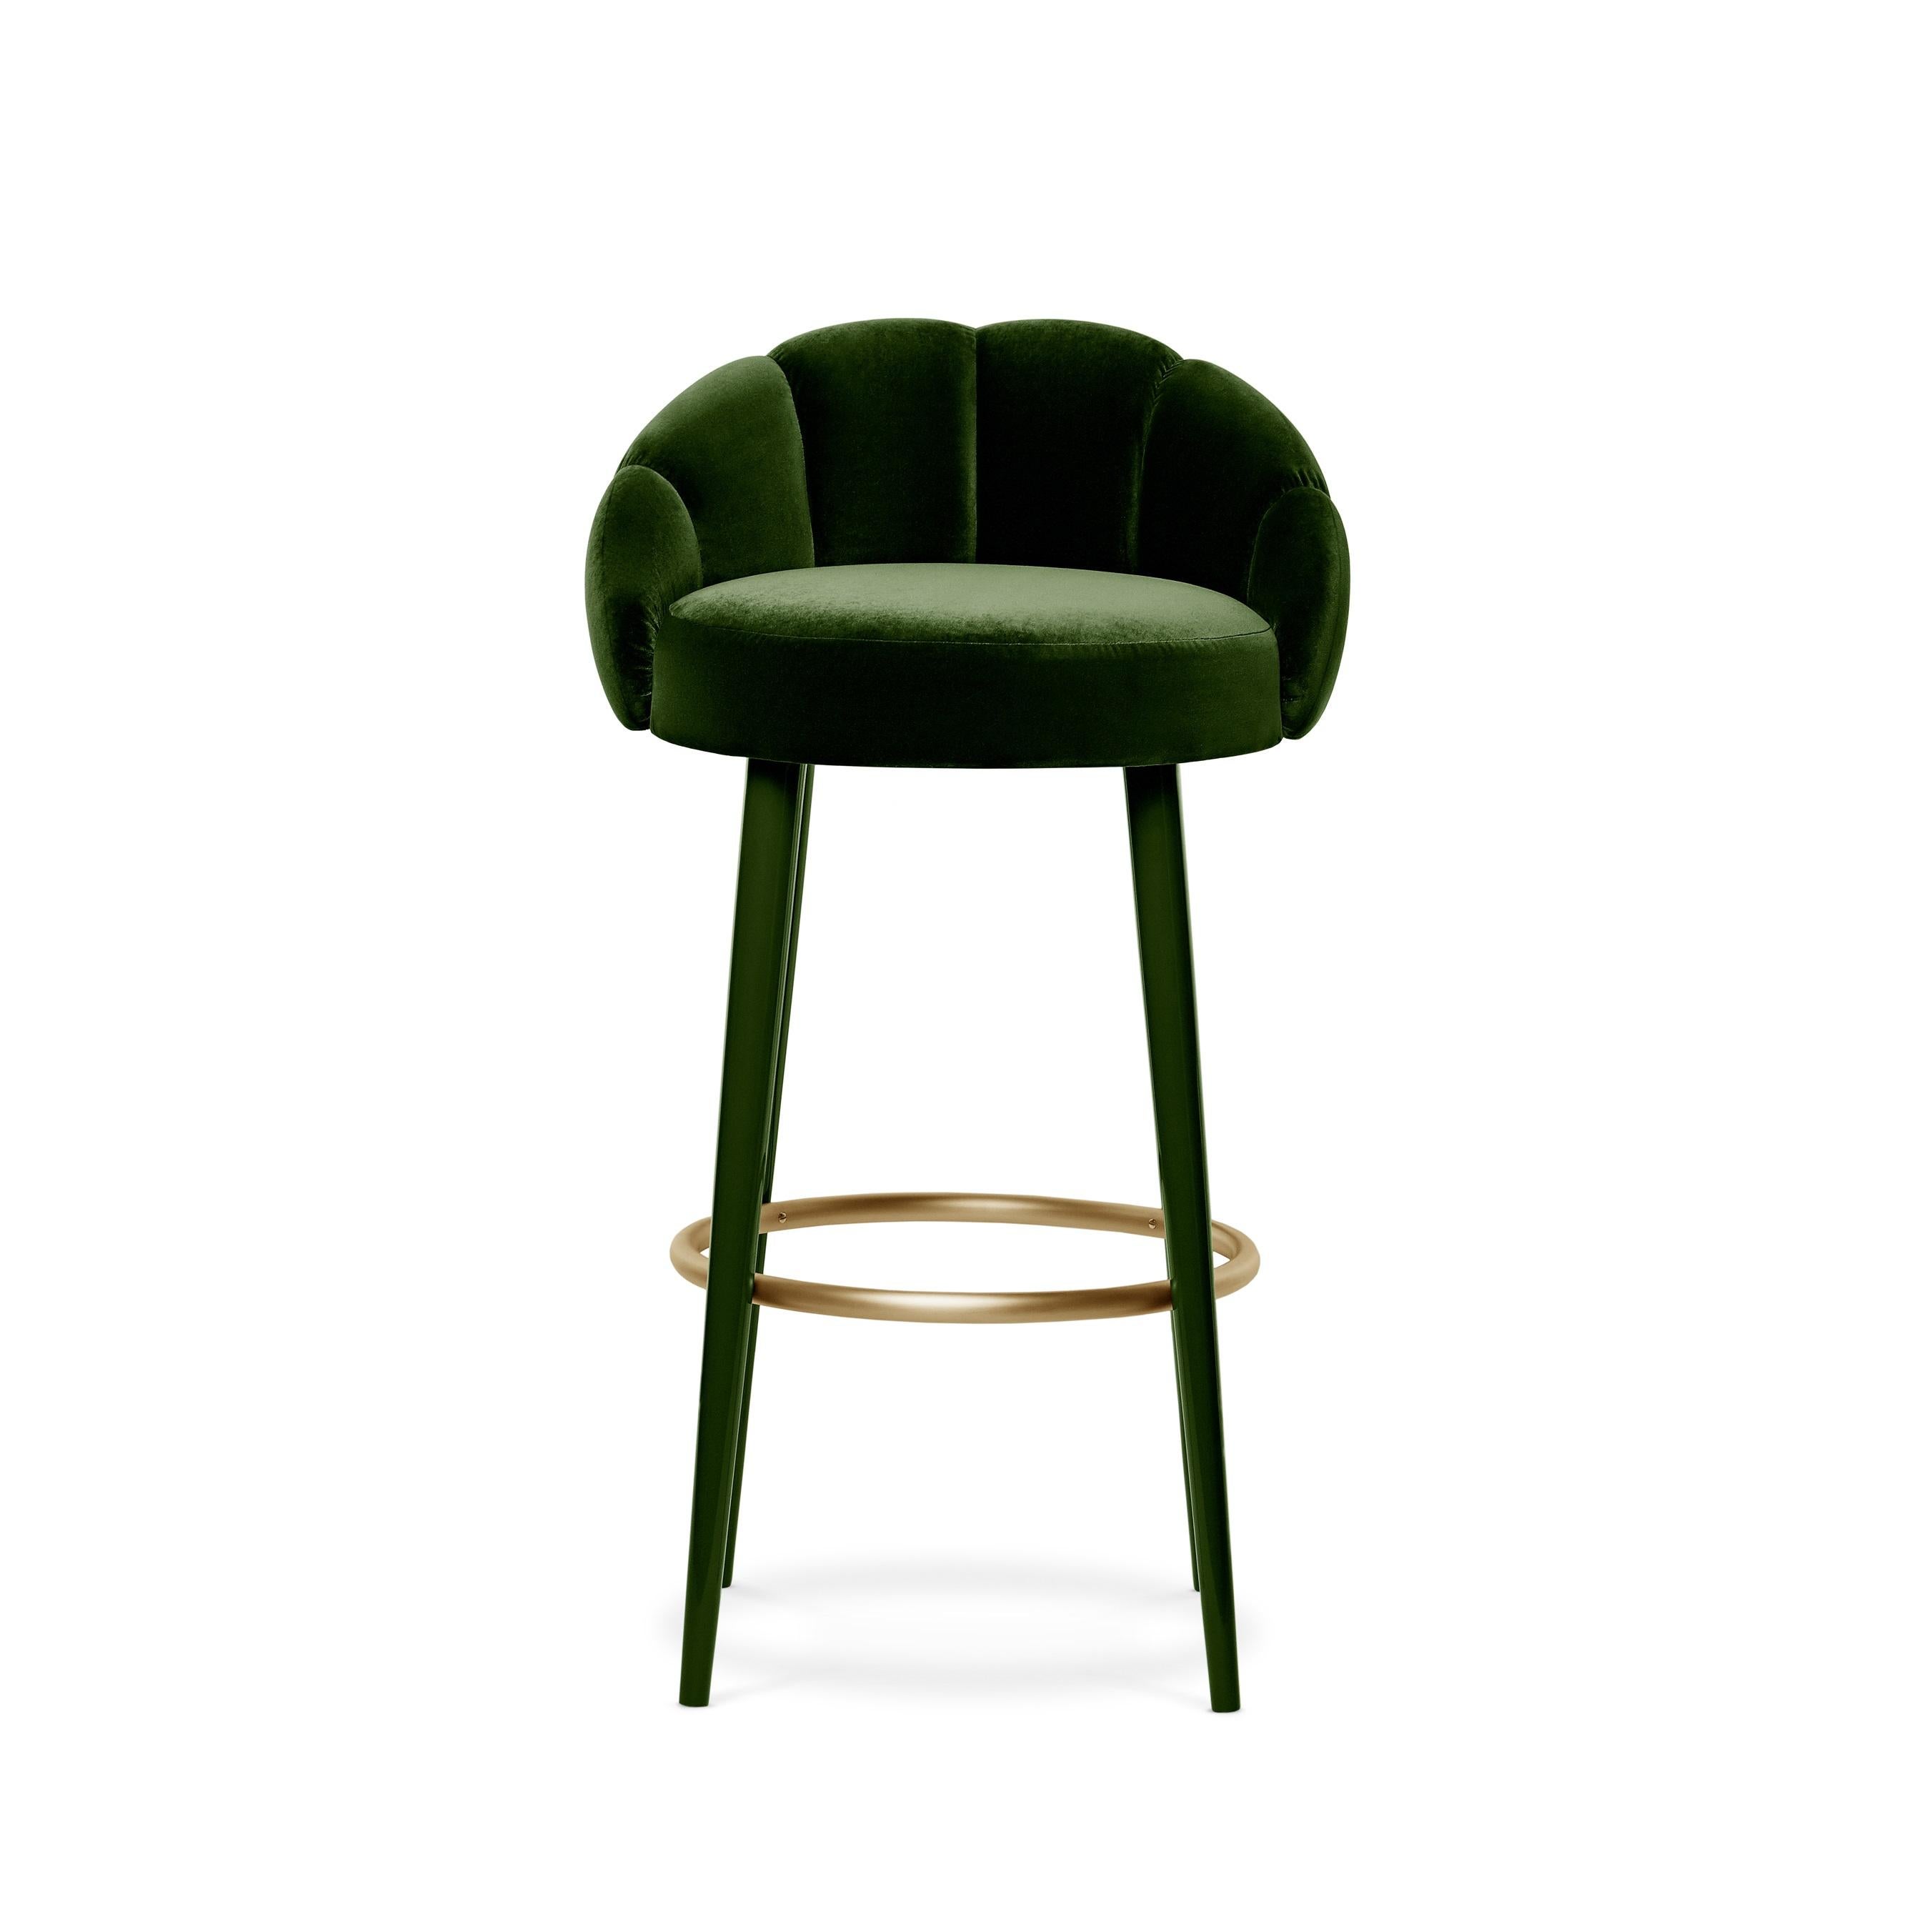 This barstool projects pure haute couture, with its sensuous feminine outline and voluptuous shape. Each exquisite curve features detailed seaming through the front to back, standing on long and sleek legs and a metal ring. It becomes the pièce de